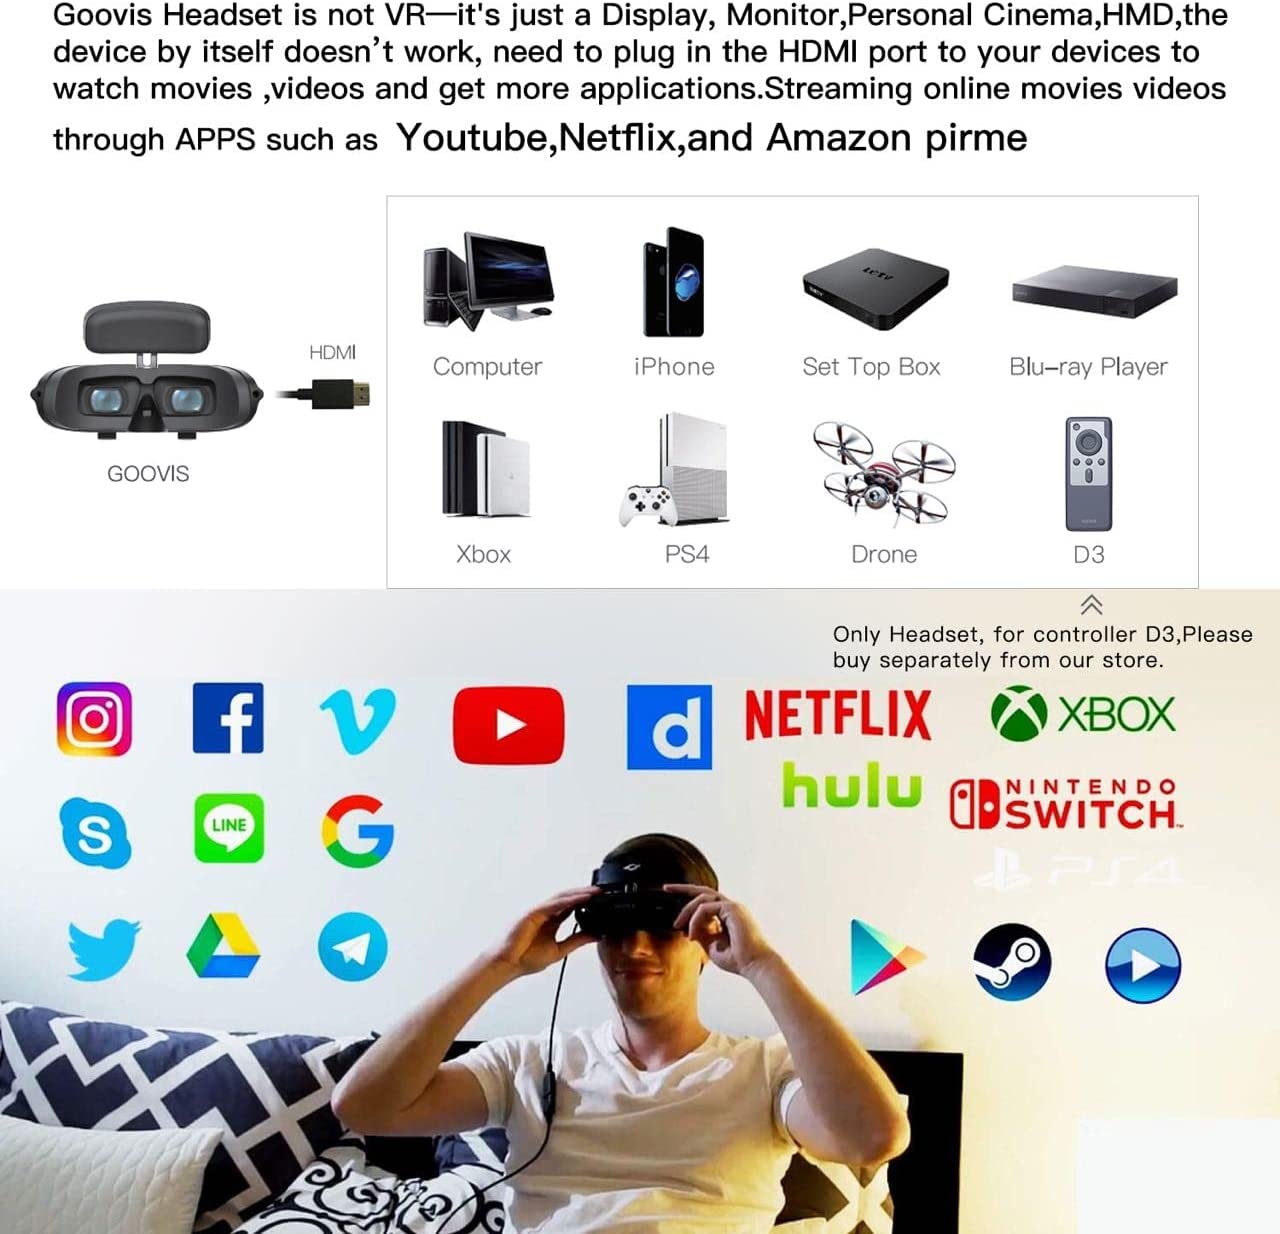 GOOVIS G with Sony 1920 x 1080 x HD Giant Screen, D Privacy Theater  Goggles Viewer Meta-Universe None VR HMD Monitor, Connected to Various 